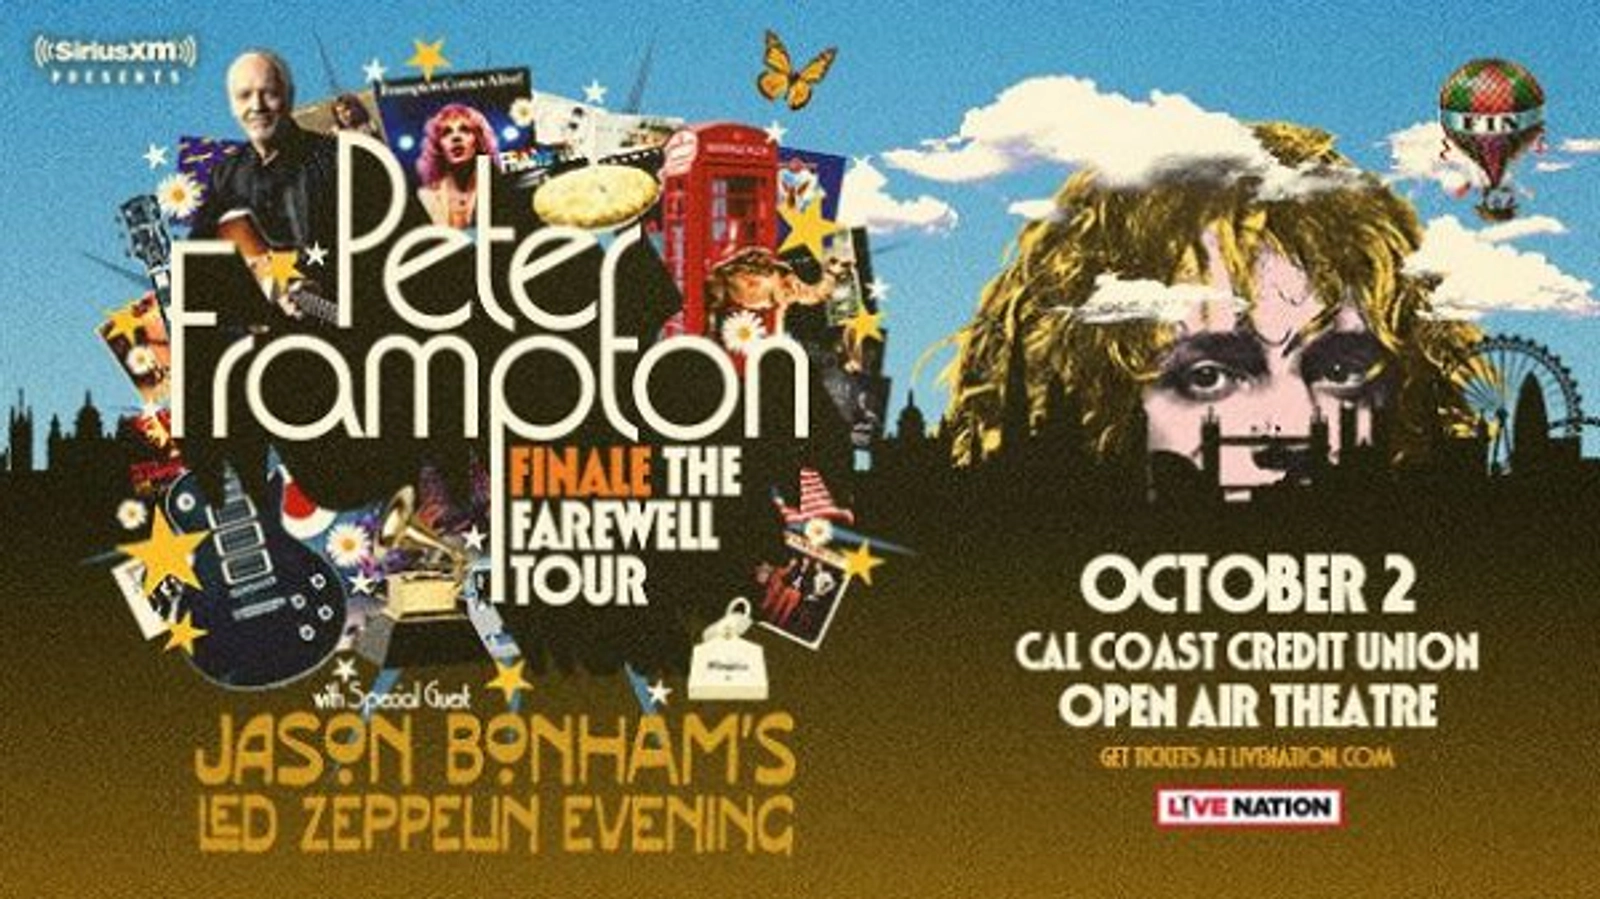  Win Peter Frampton Finale: The
Farewell Tour Tickets - Thumbnail Image